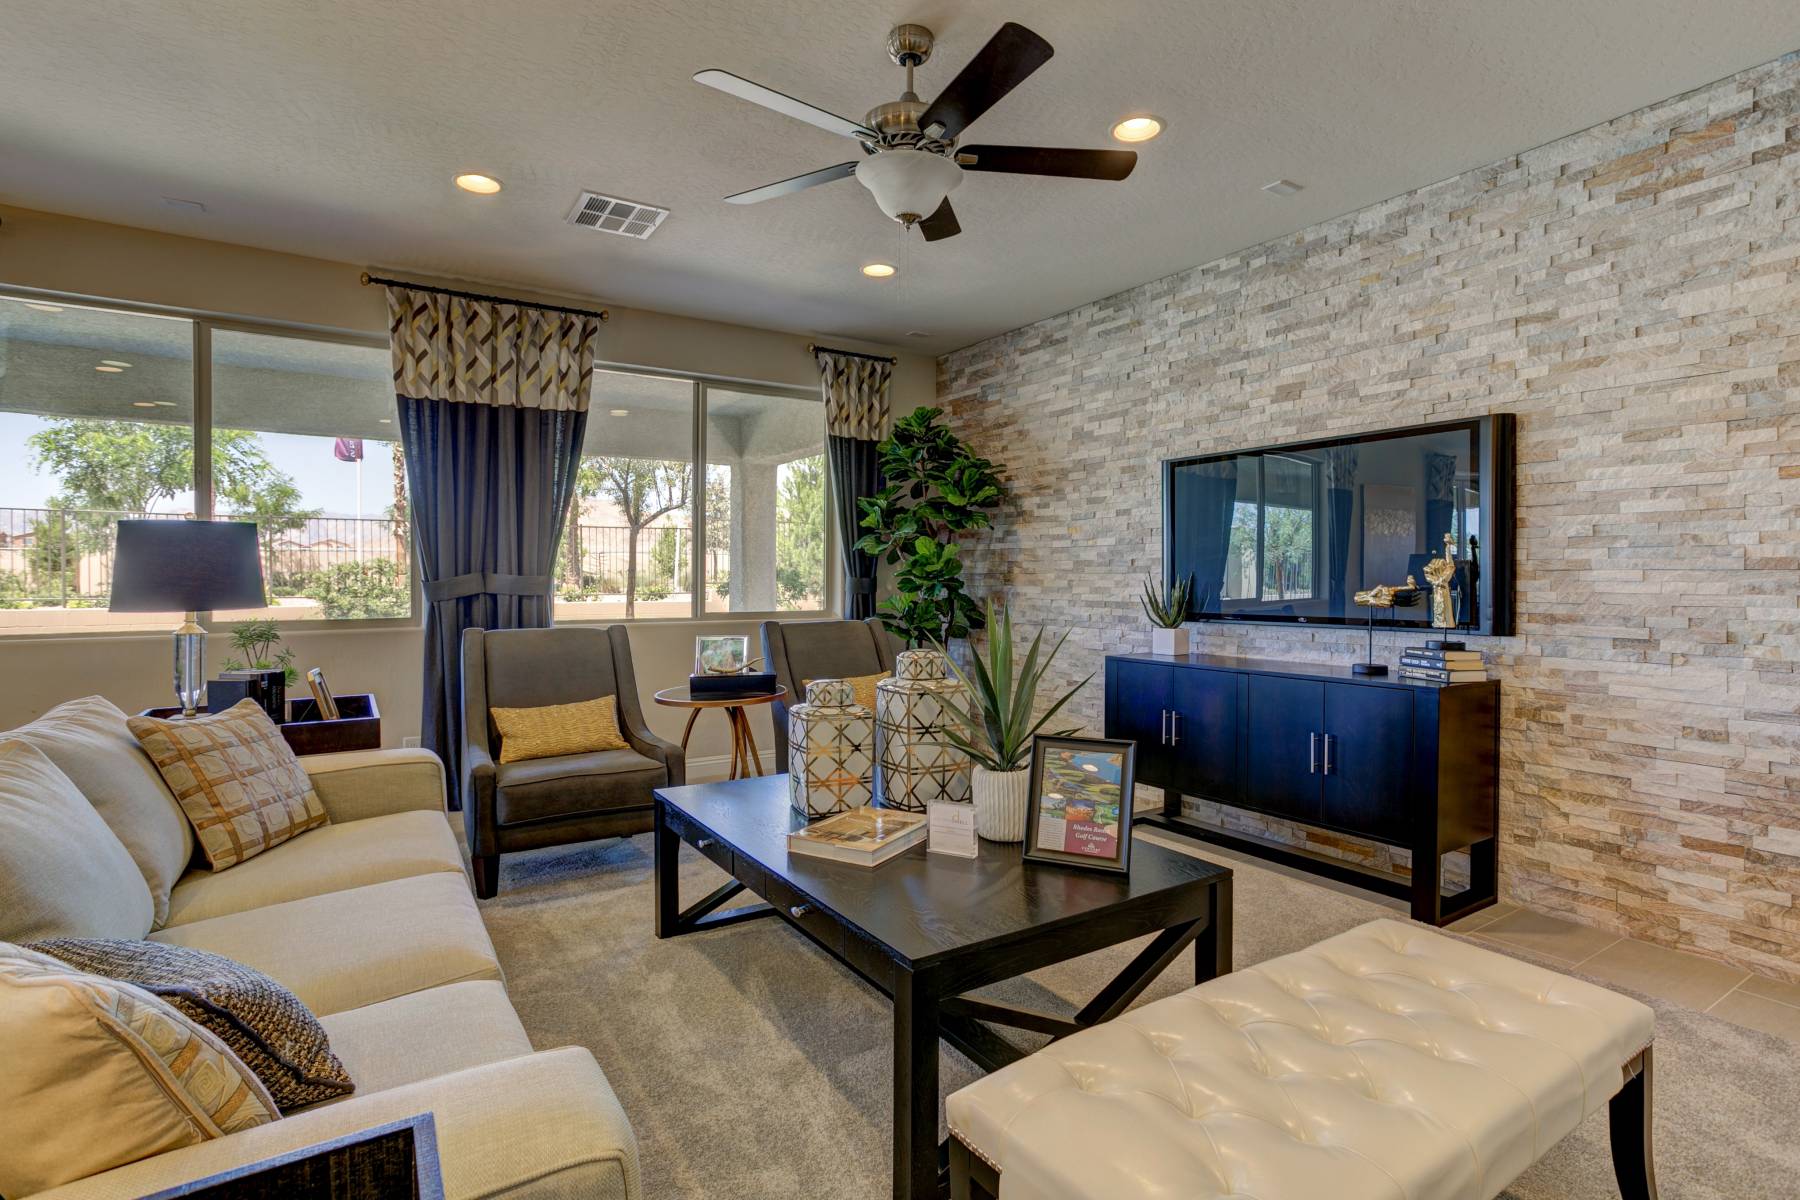 Rhodes Ranch Homes For Sale Las Vegas NV | Bentley Realty Group